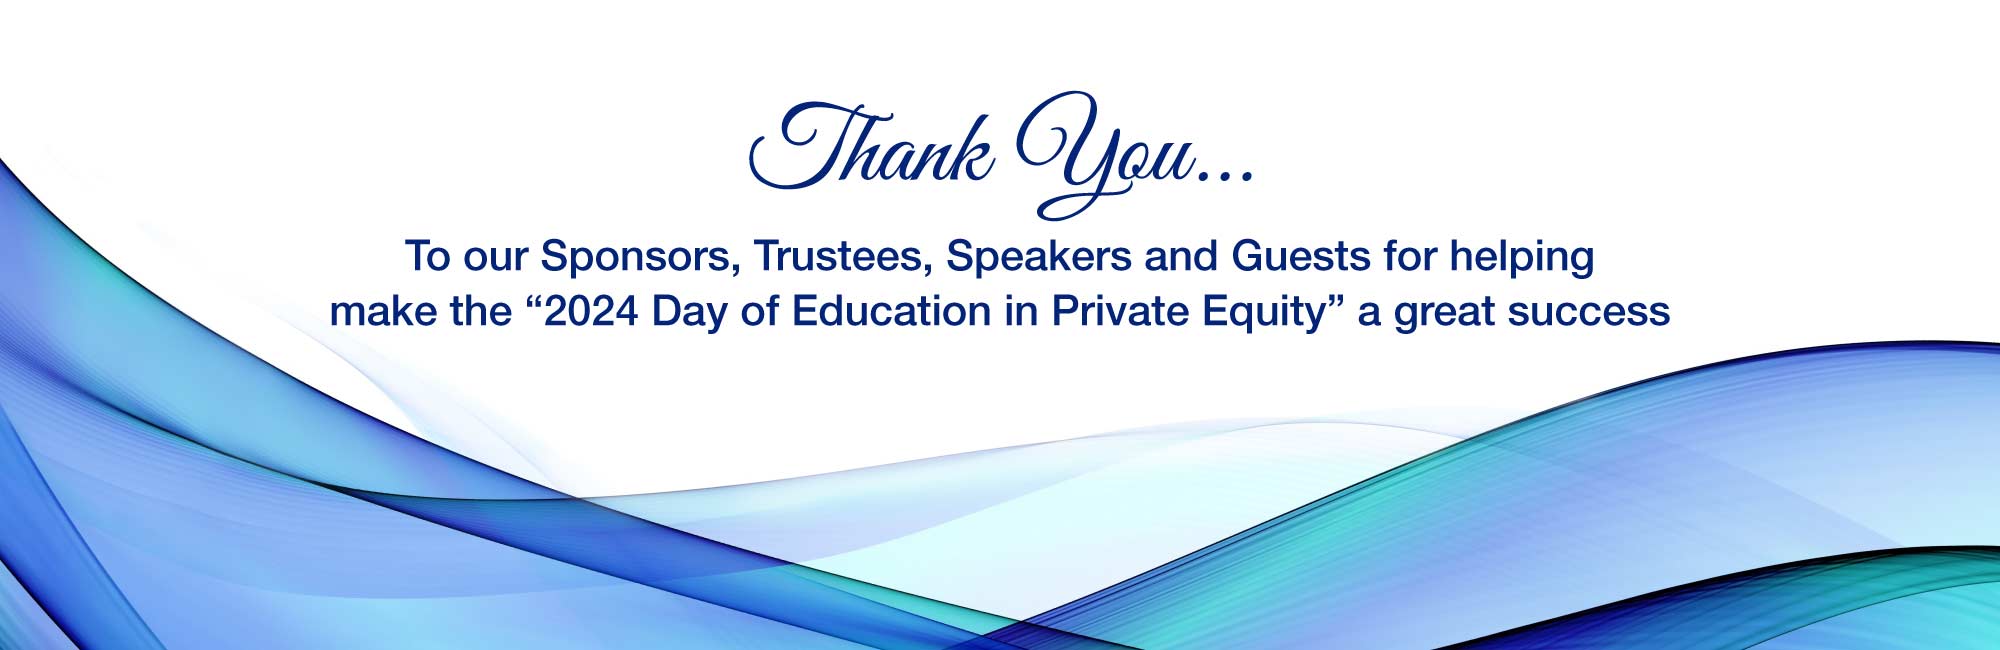 Thank You... To our Sponsors, Trustees, Speakers and Guests for helping make the “2024 Day of Education in Private Equity” a great success.